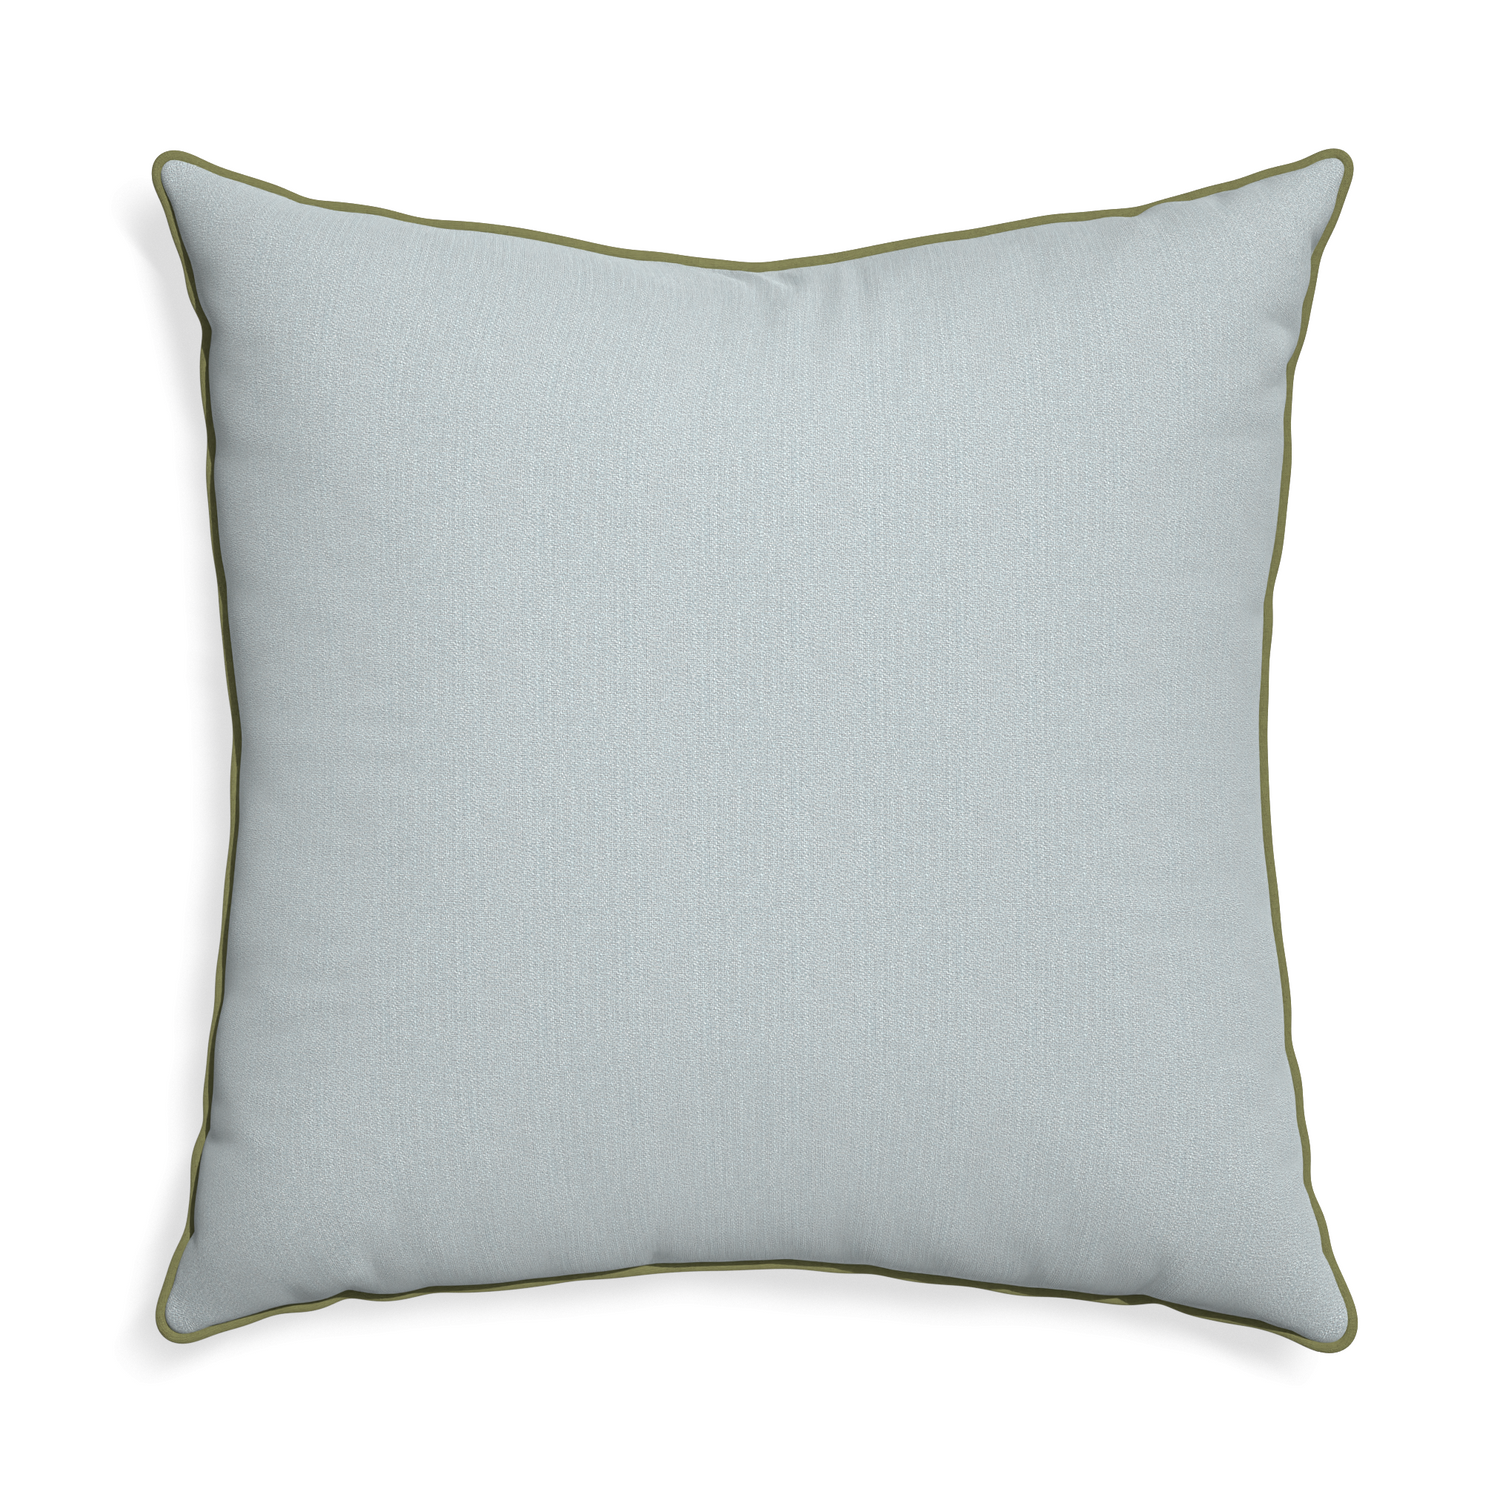 Euro-sham sea custom grey bluepillow with moss piping on white background